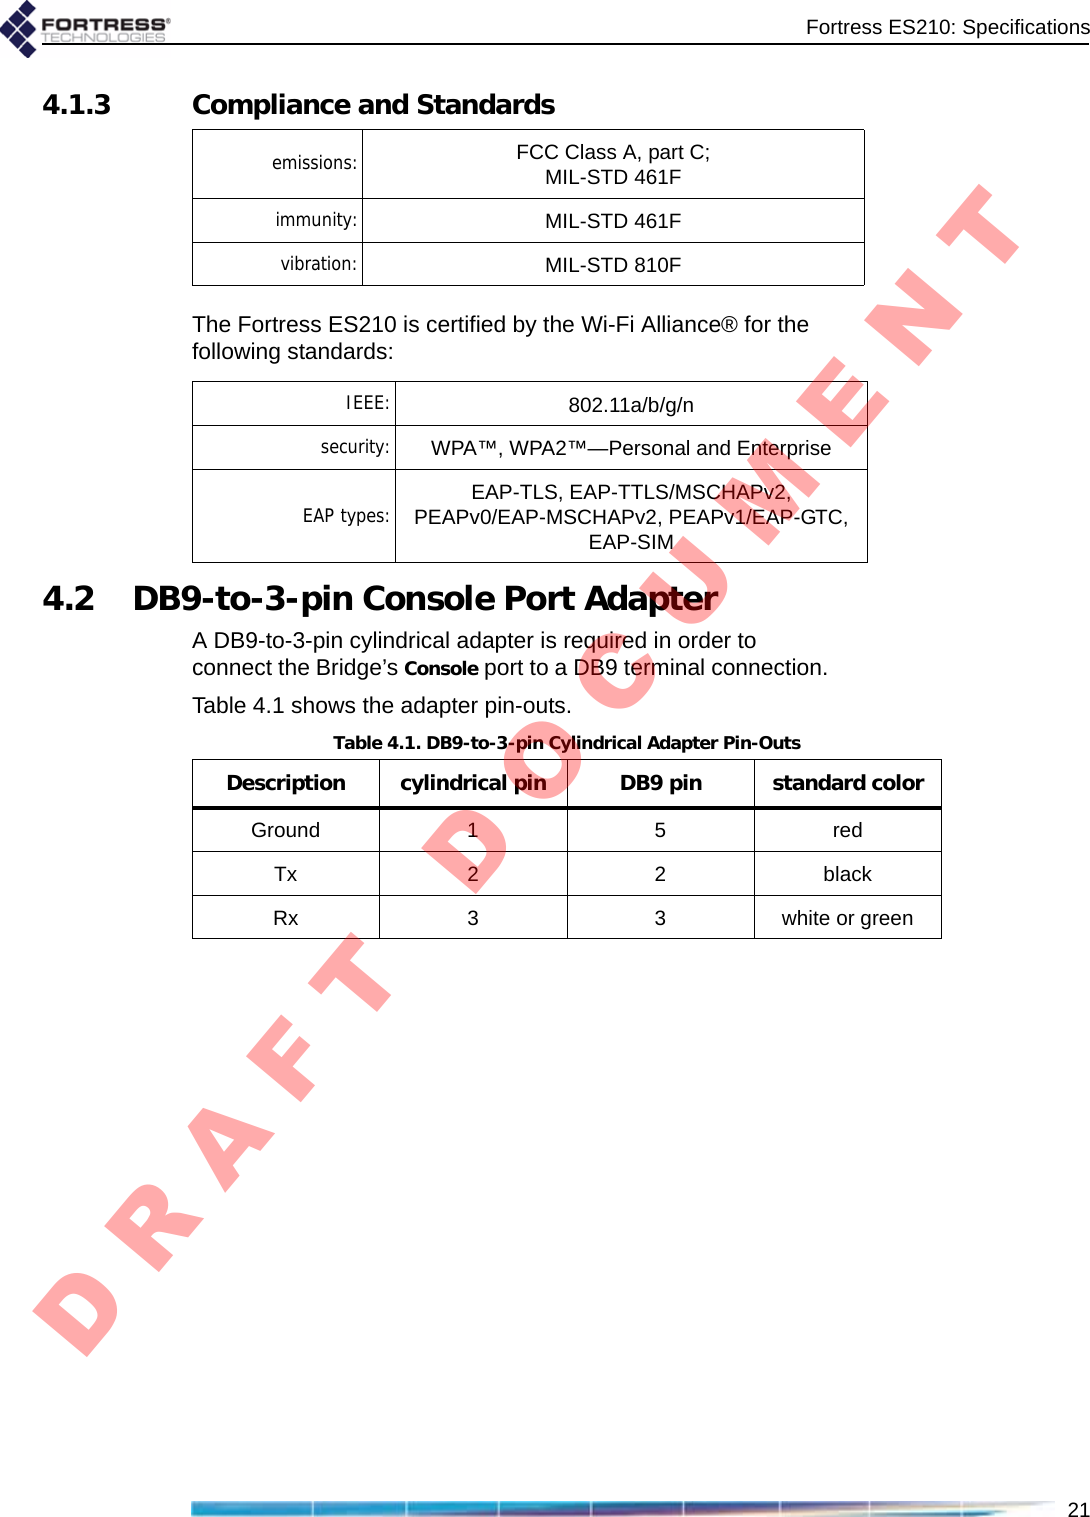 Fortress ES210: Specifications214.1.3 Compliance and Standards The Fortress ES210 is certified by the Wi-Fi Alliance® for the following standards: 4.2 DB9-to-3-pin Console Port AdapterA DB9-to-3-pin cylindrical adapter is required in order to connect the Bridge’s Console port to a DB9 terminal connection.Table 4.1 shows the adapter pin-outs.emissions: FCC Class A, part C;MIL-STD 461Fimmunity: MIL-STD 461Fvibration: MIL-STD 810FIEEE: 802.11a/b/g/nsecurity: WPA™, WPA2™—Personal and EnterpriseEAP types: EAP-TLS, EAP-TTLS/MSCHAPv2, PEAPv0/EAP-MSCHAPv2, PEAPv1/EAP-GTC,EAP-SIMTable 4.1. DB9-to-3-pin Cylindrical Adapter Pin-OutsDescription cylindrical pin DB9 pin standard colorGround 1 5 redTx 2 2 blackRx 3 3 white or greenD R A F T   D O C U M E N T